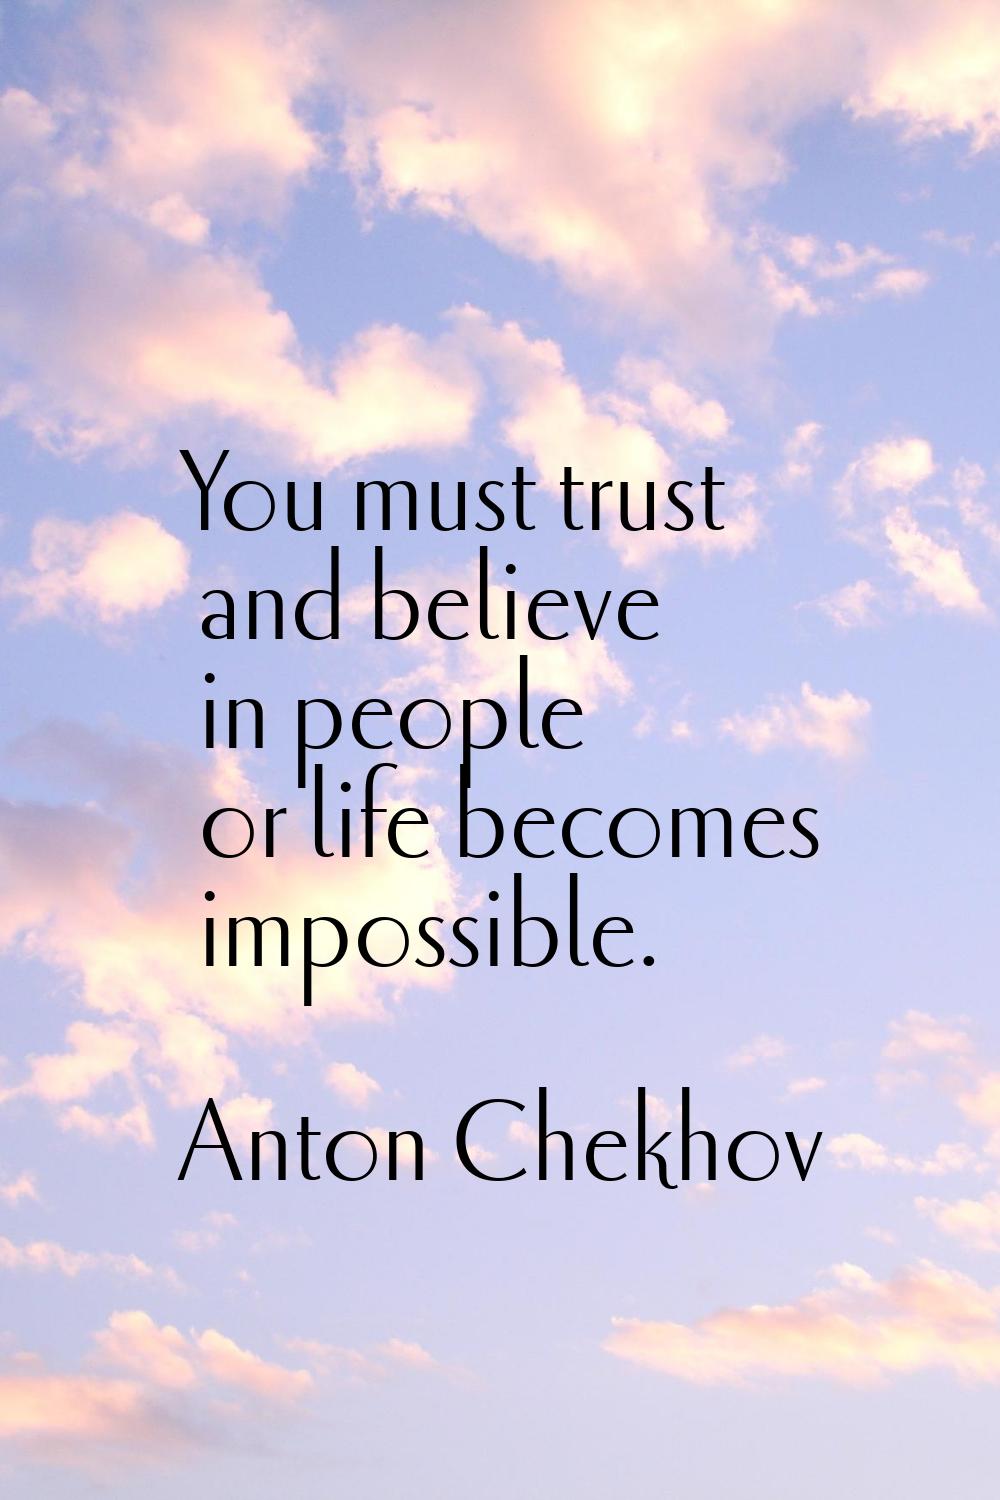 You must trust and believe in people or life becomes impossible.